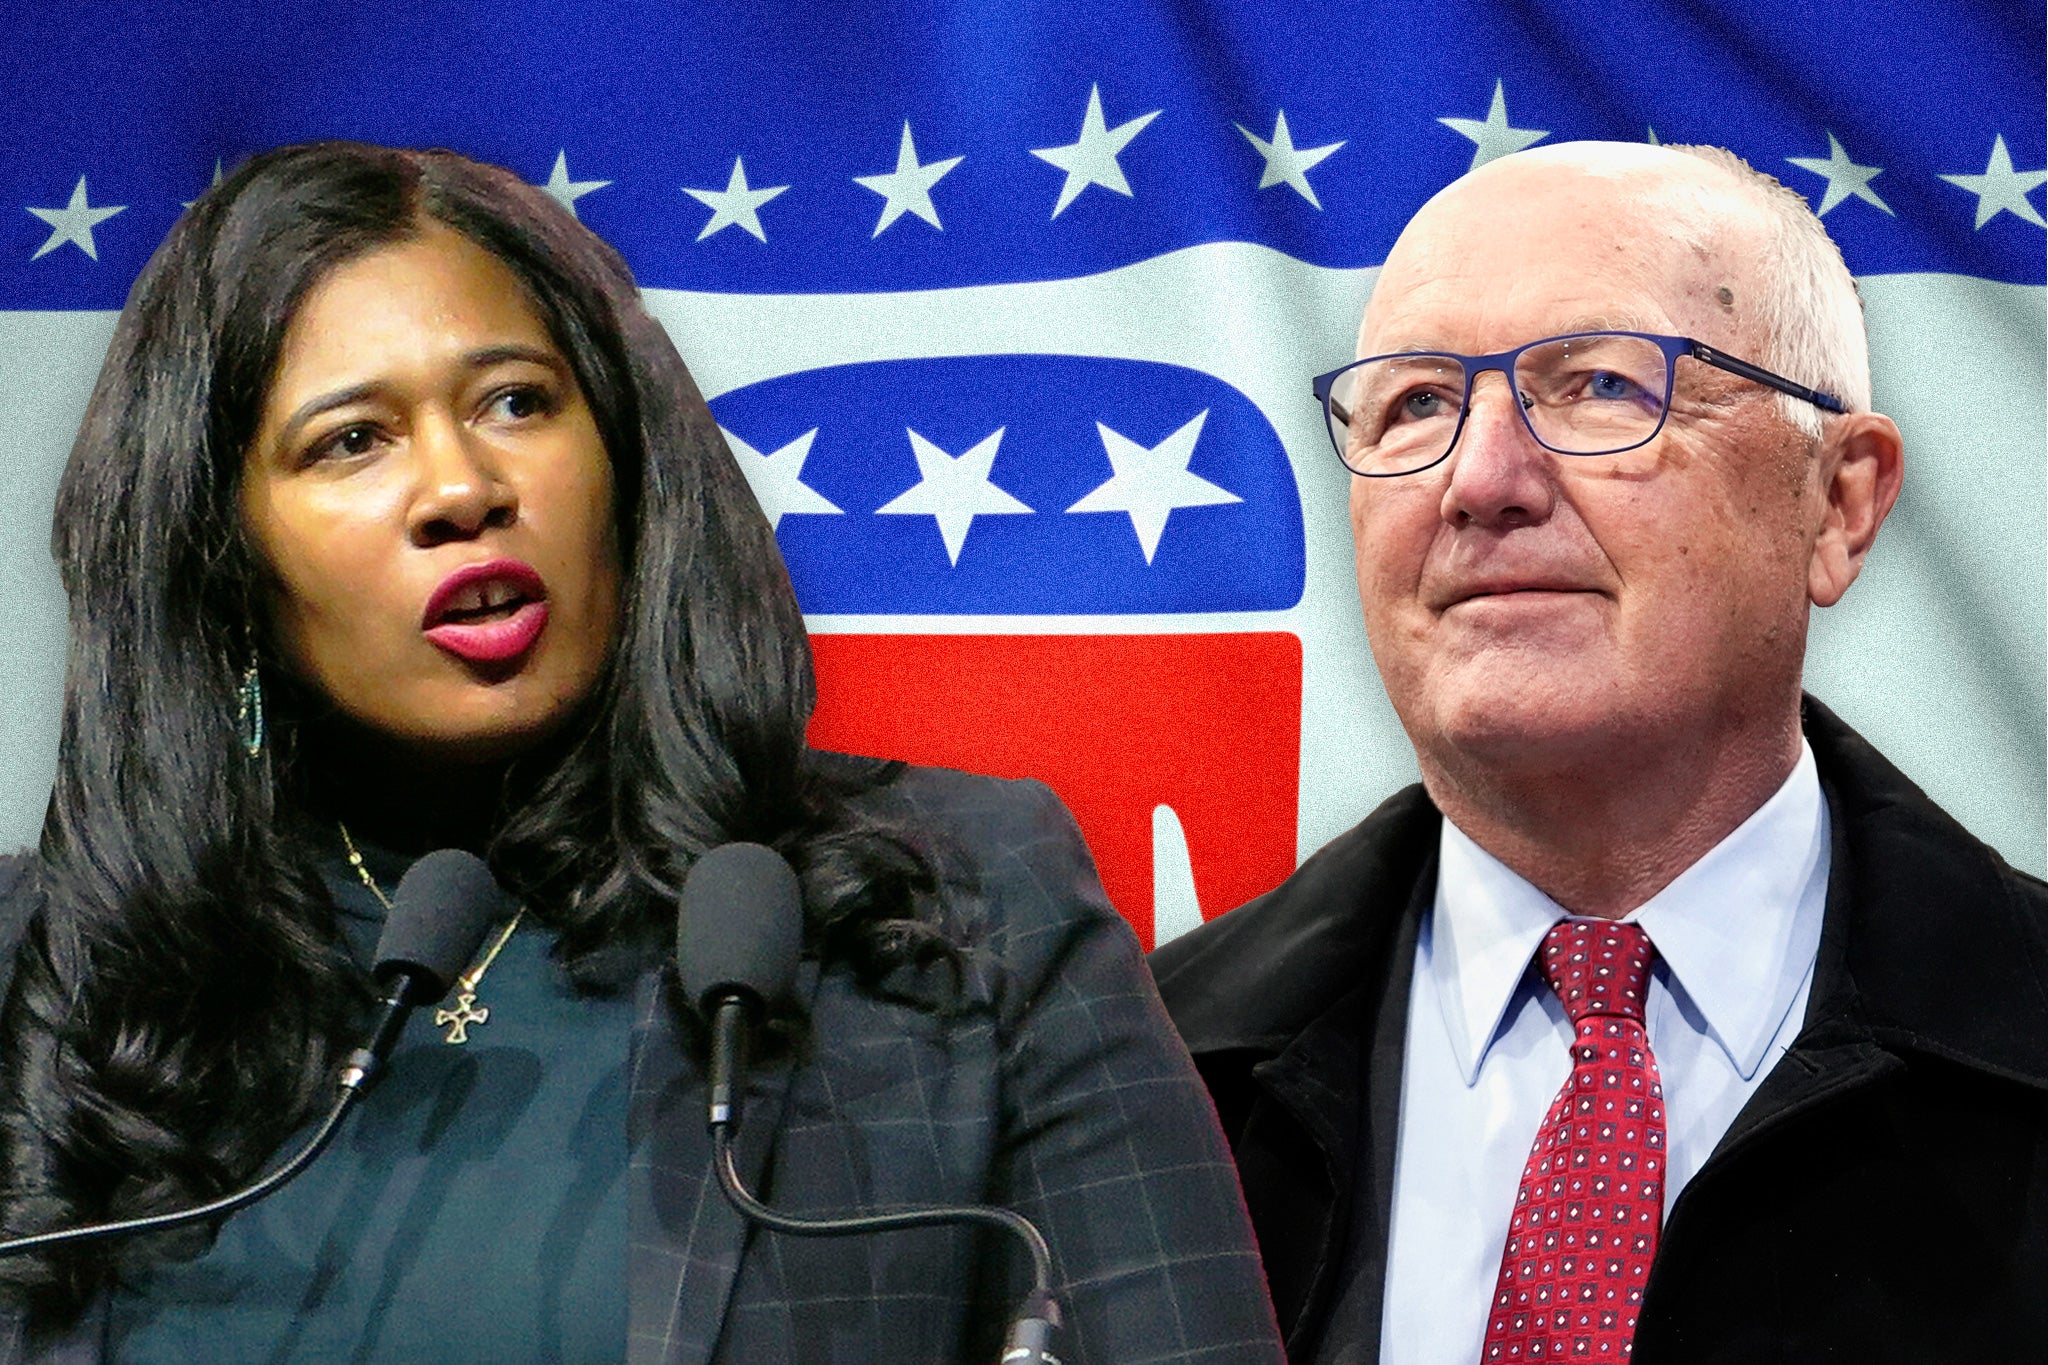 Kristina Karamo, left, insists that she is still the chairwoman of the Michigan GOP, despite losing a leadership vote to Pete Hoekstra, right